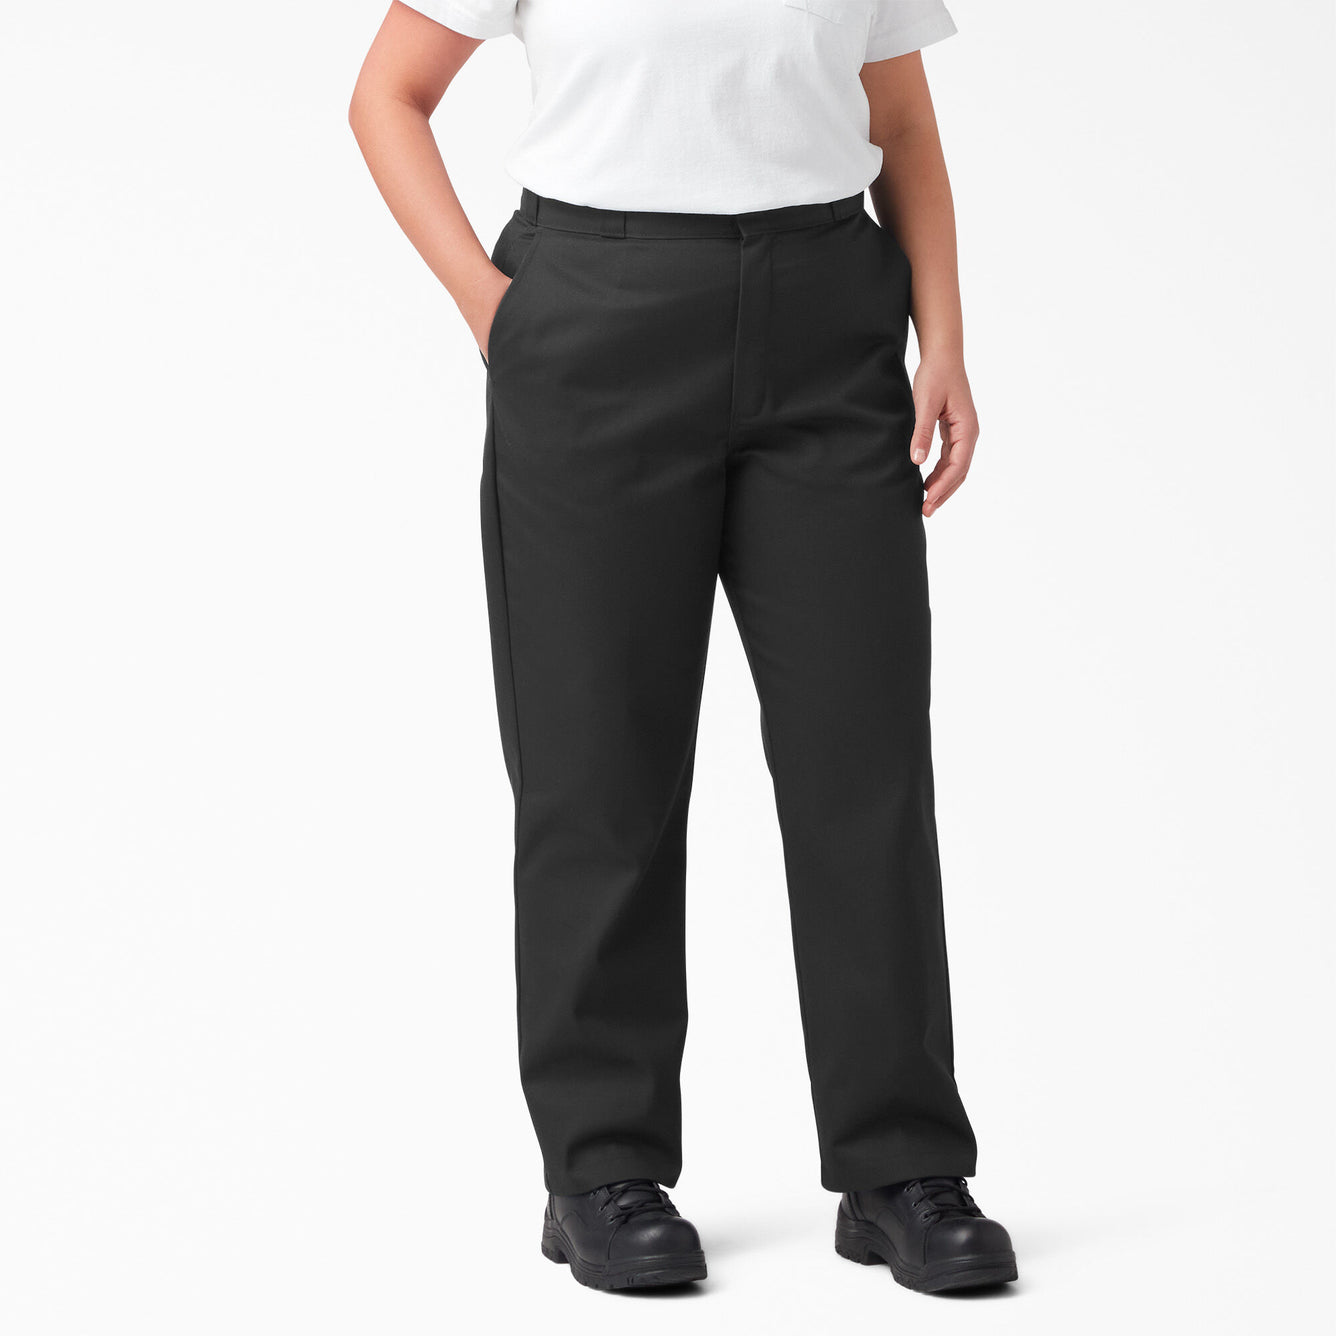 Dickies - Made to Fit the Curvy Girl - Women's Plus Original 874